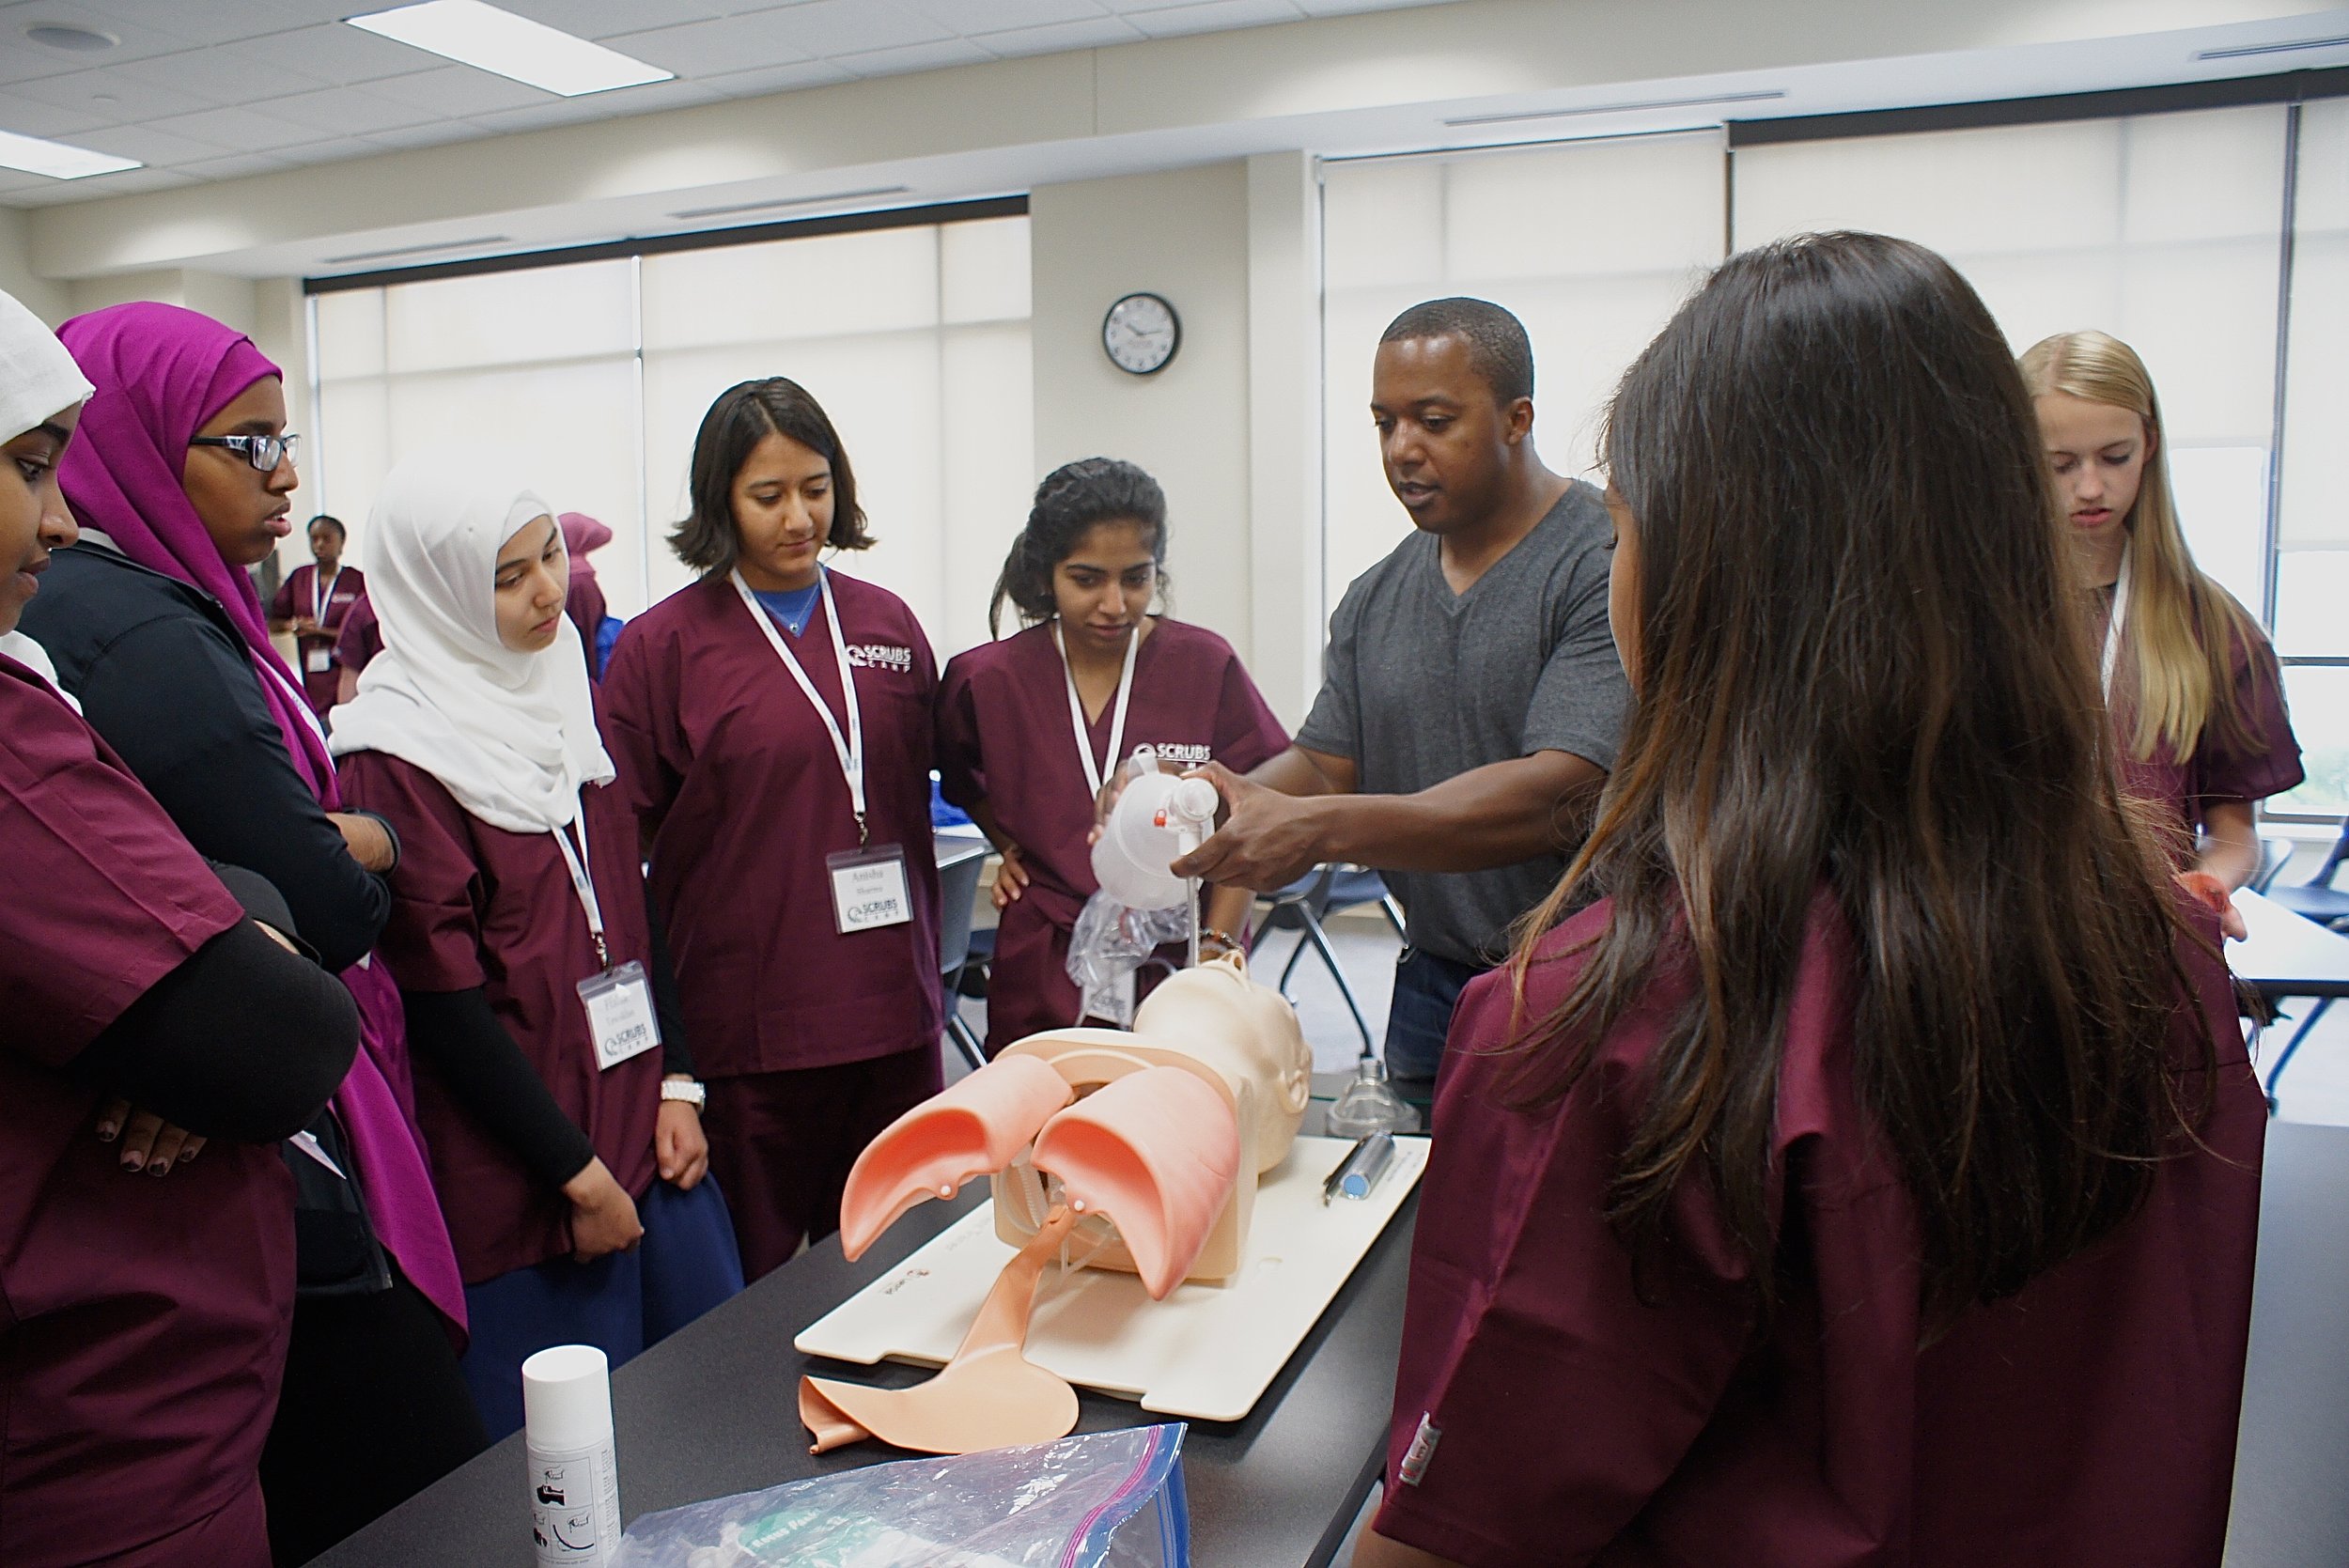   “You never know until you see the profession yourself,” said Green. When asked about his favorite part, Green said that he enjoys work with trauma patients. After the presentation, students experienced putting a patient under anesthesia using manne